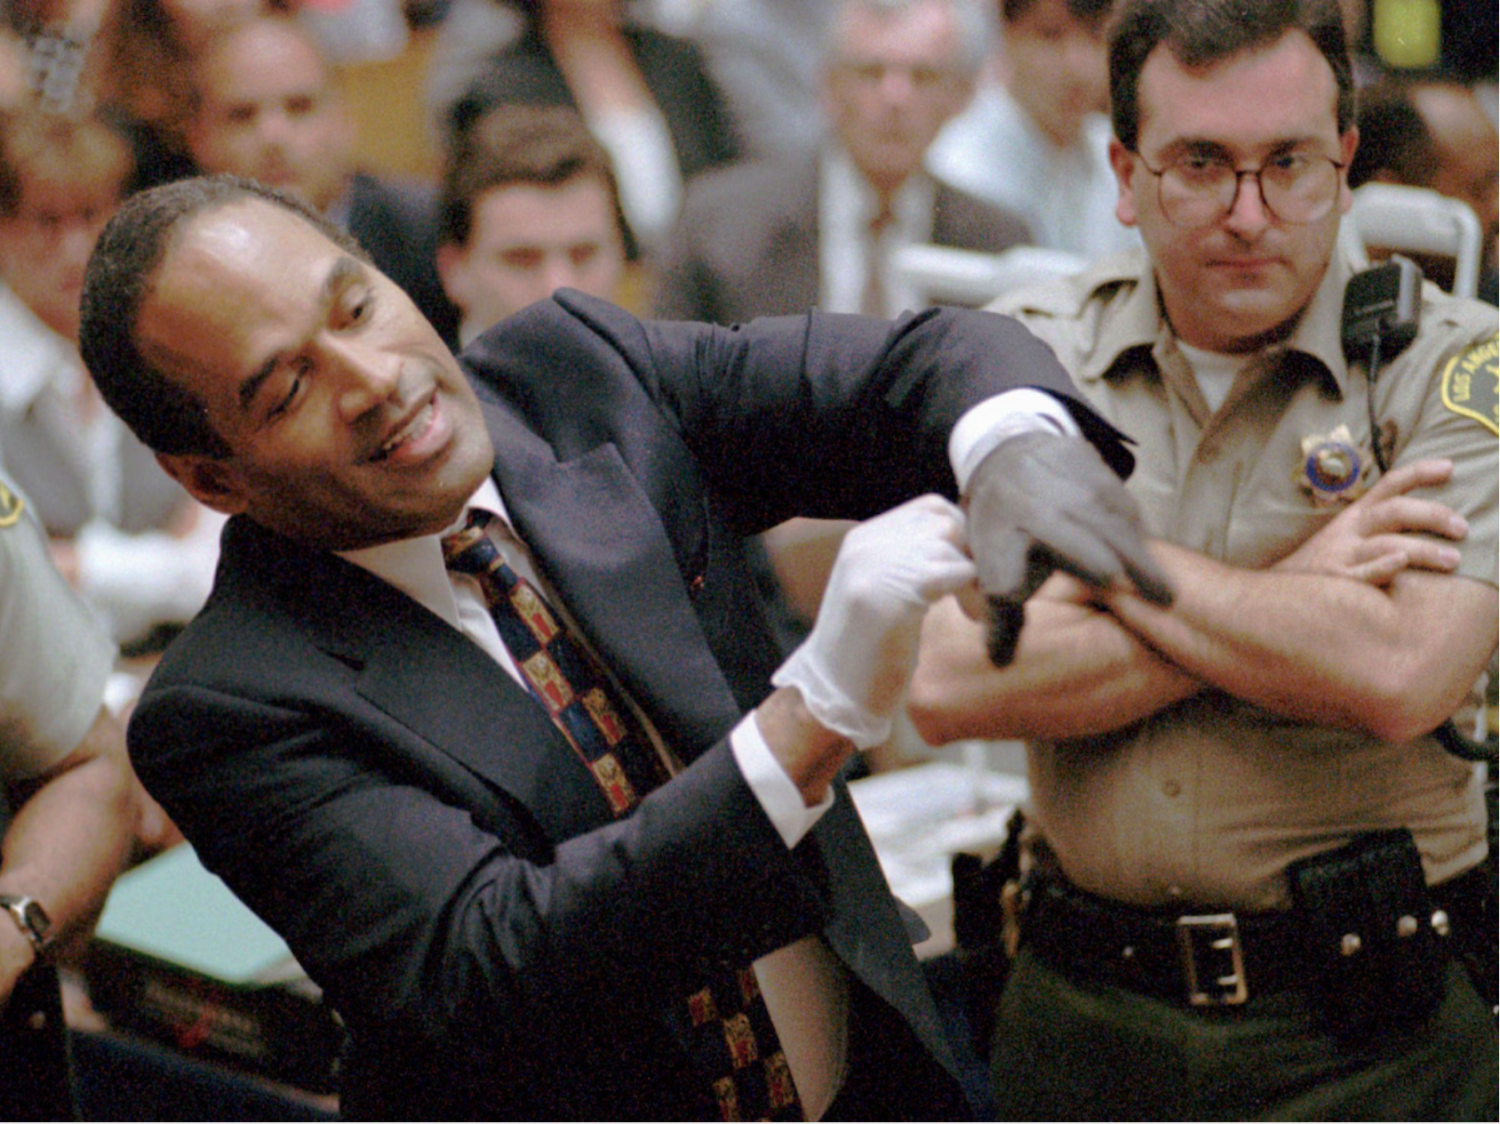 O.J. Simpson in a Los Angeles courtroom on June 15, 1995. (Sam Mircovich/AP)